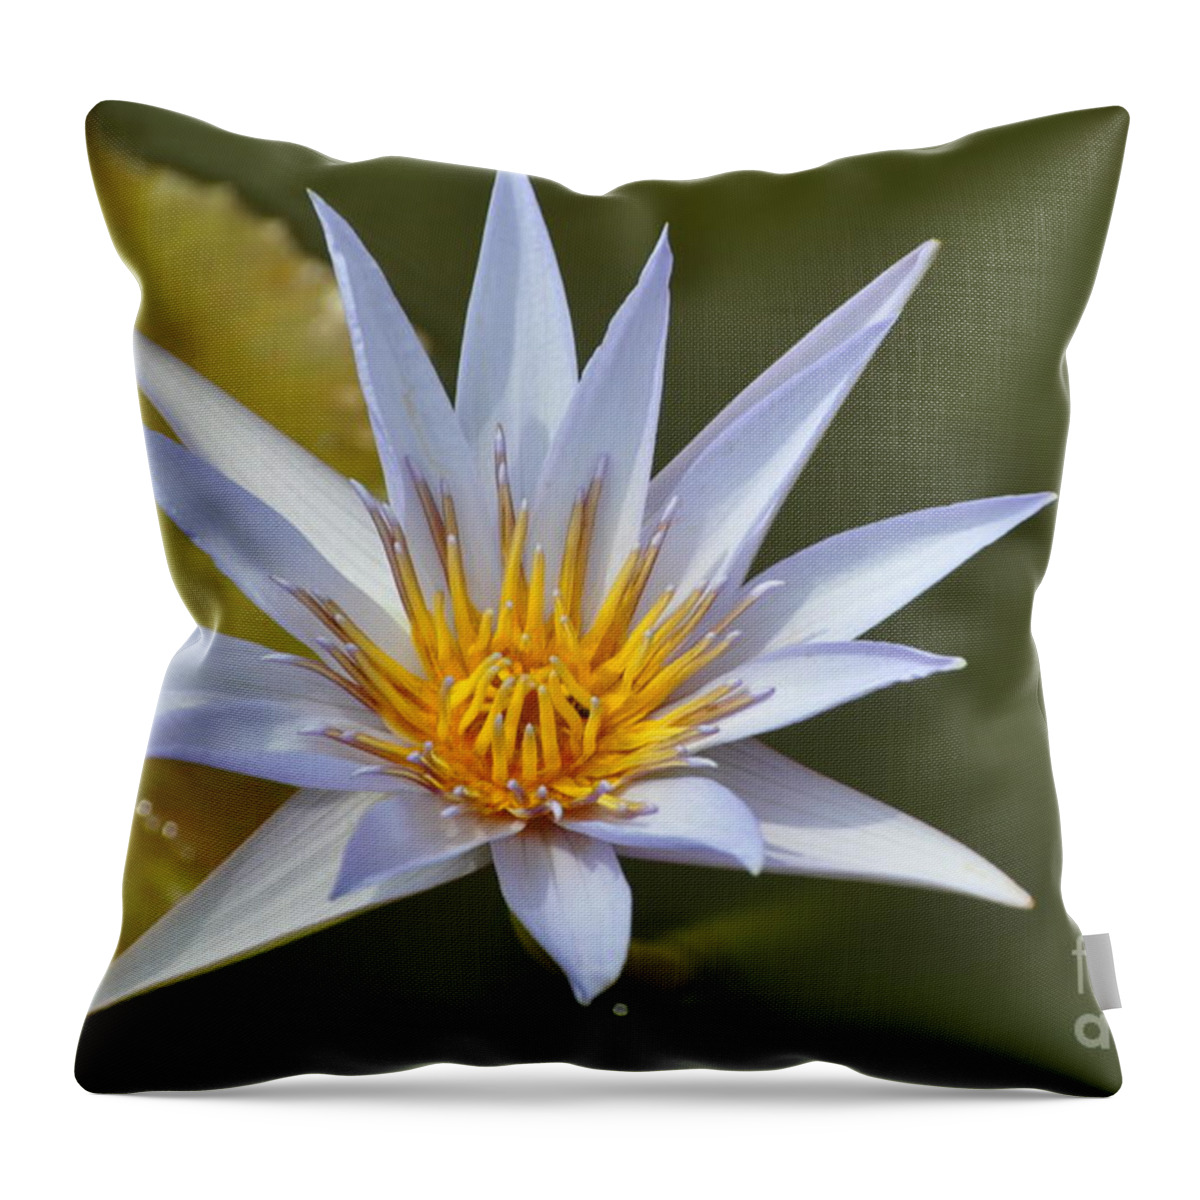 Water Lily Throw Pillow featuring the photograph Aquatic Beauty by Nona Kumah